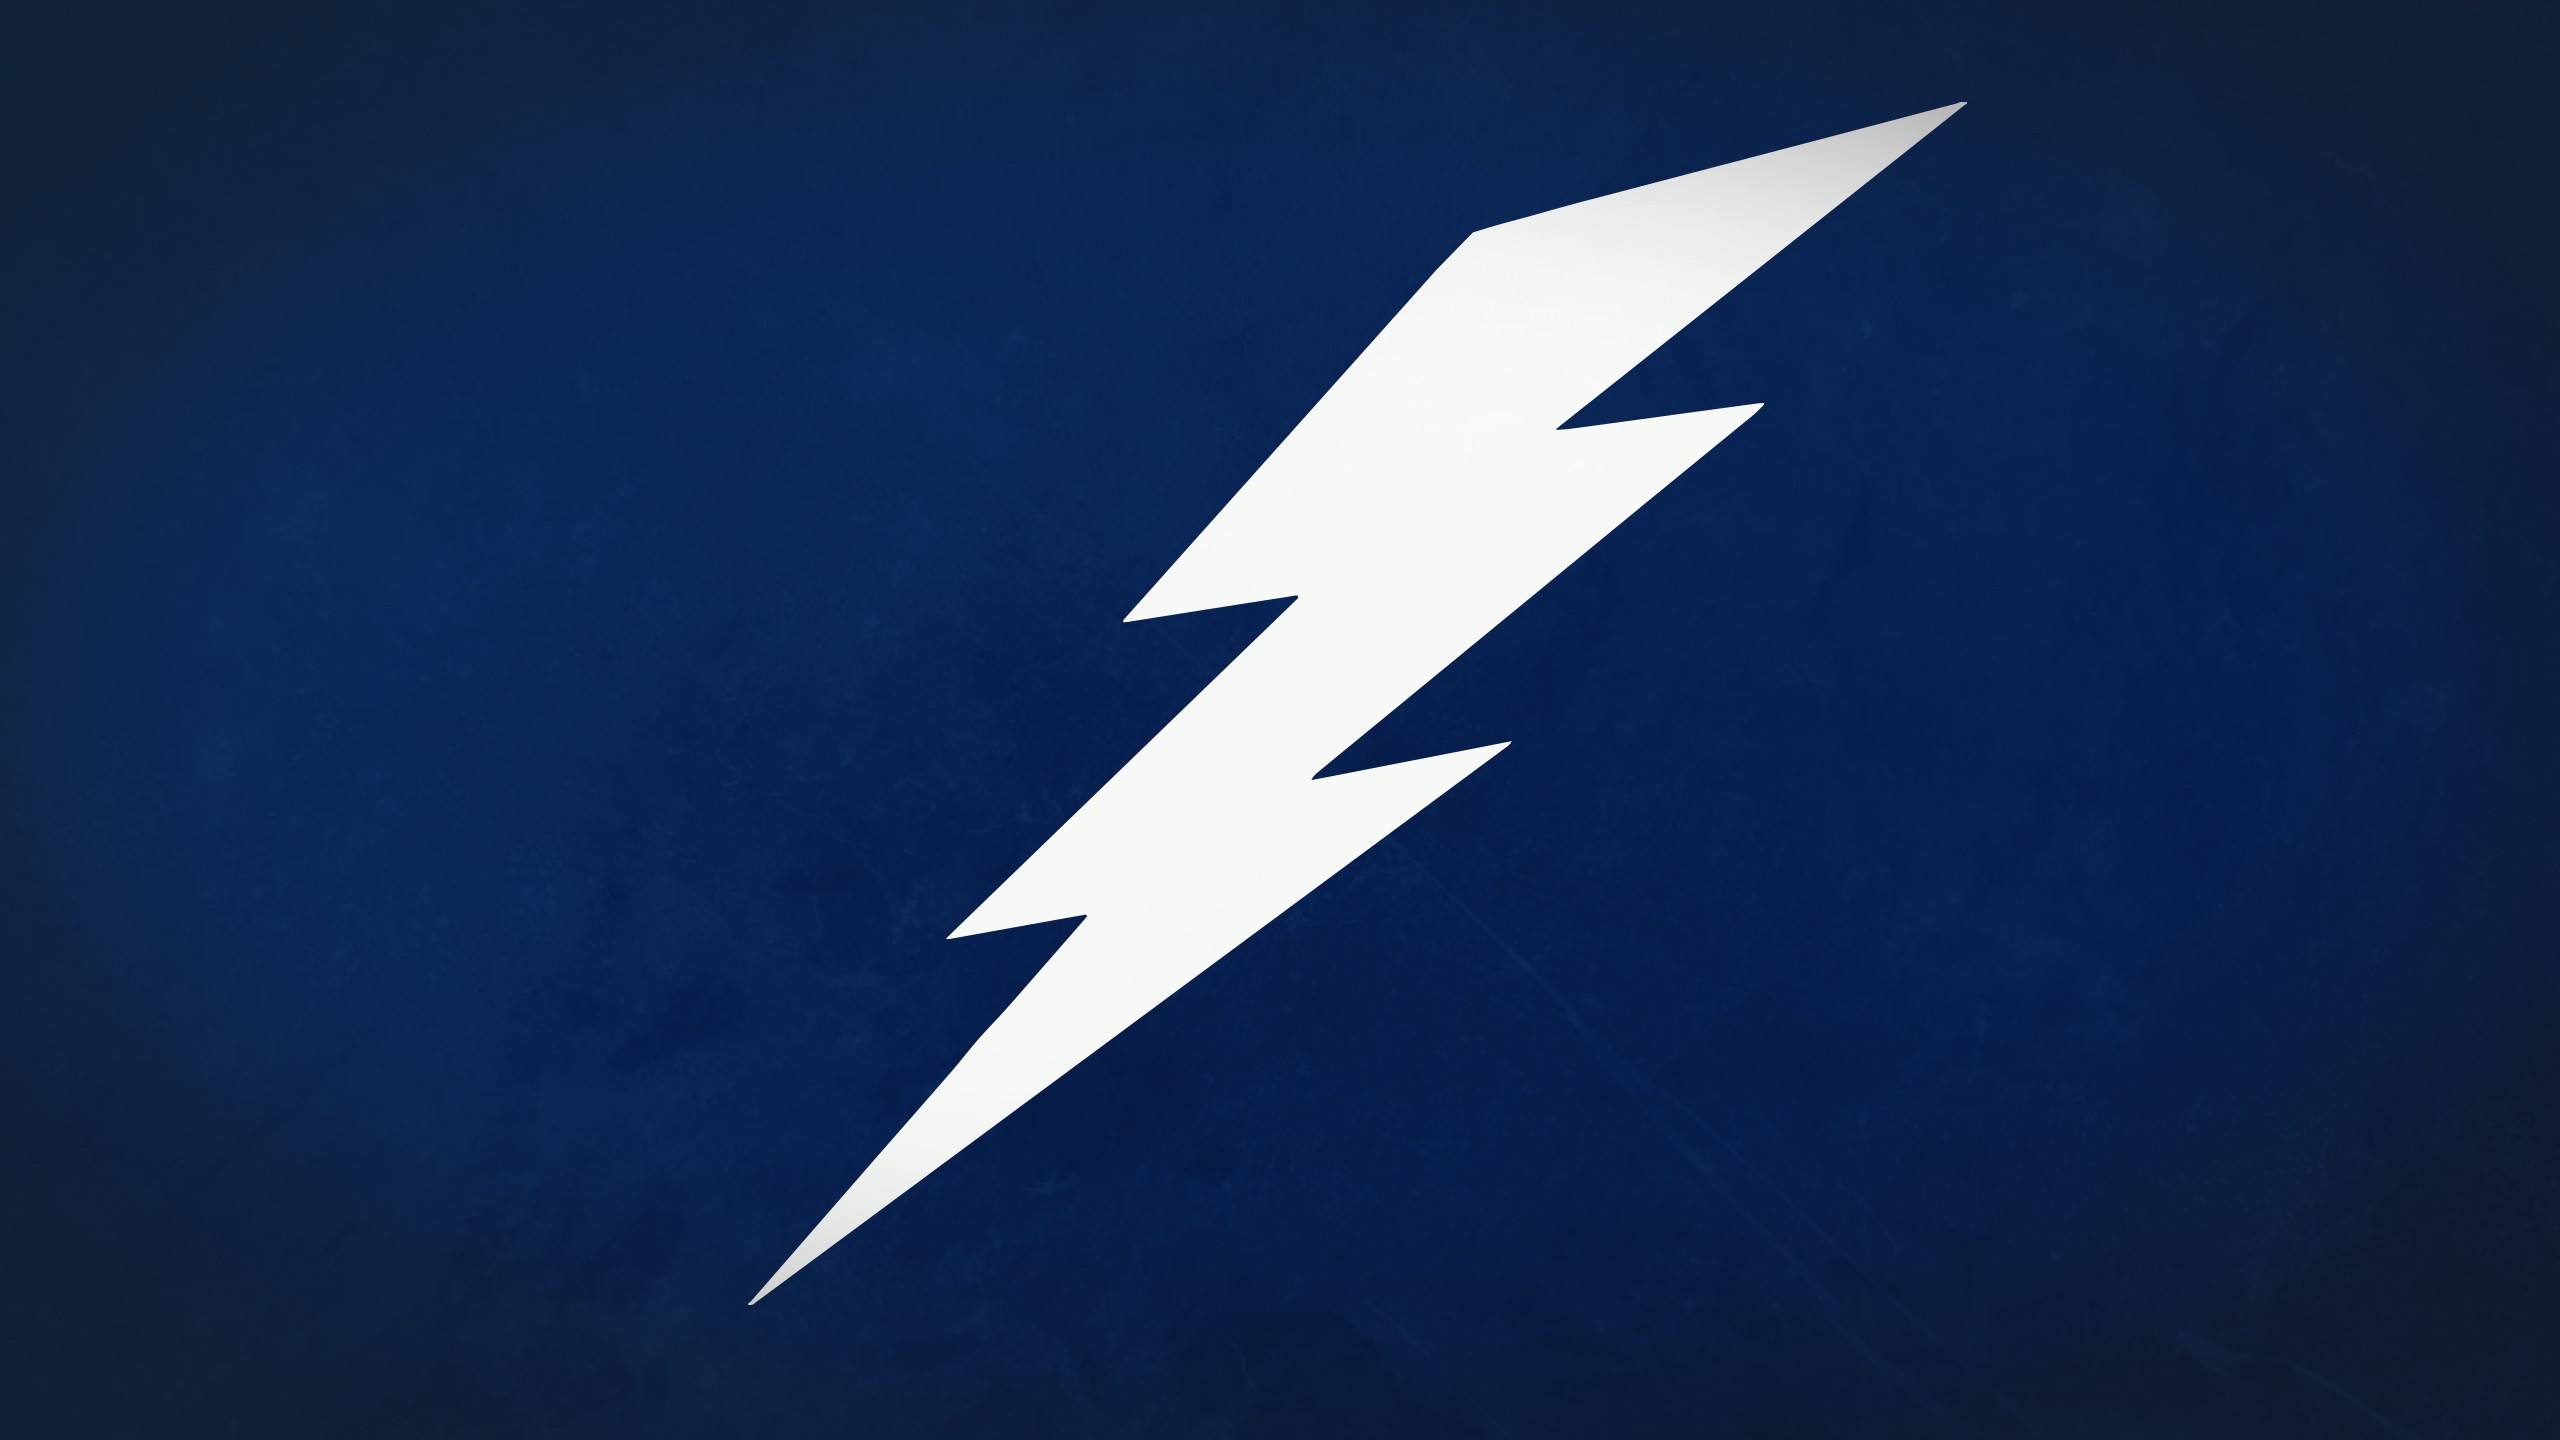 Tampa Bay Lightning HD Wallpapers Backgrounds 2560x1440